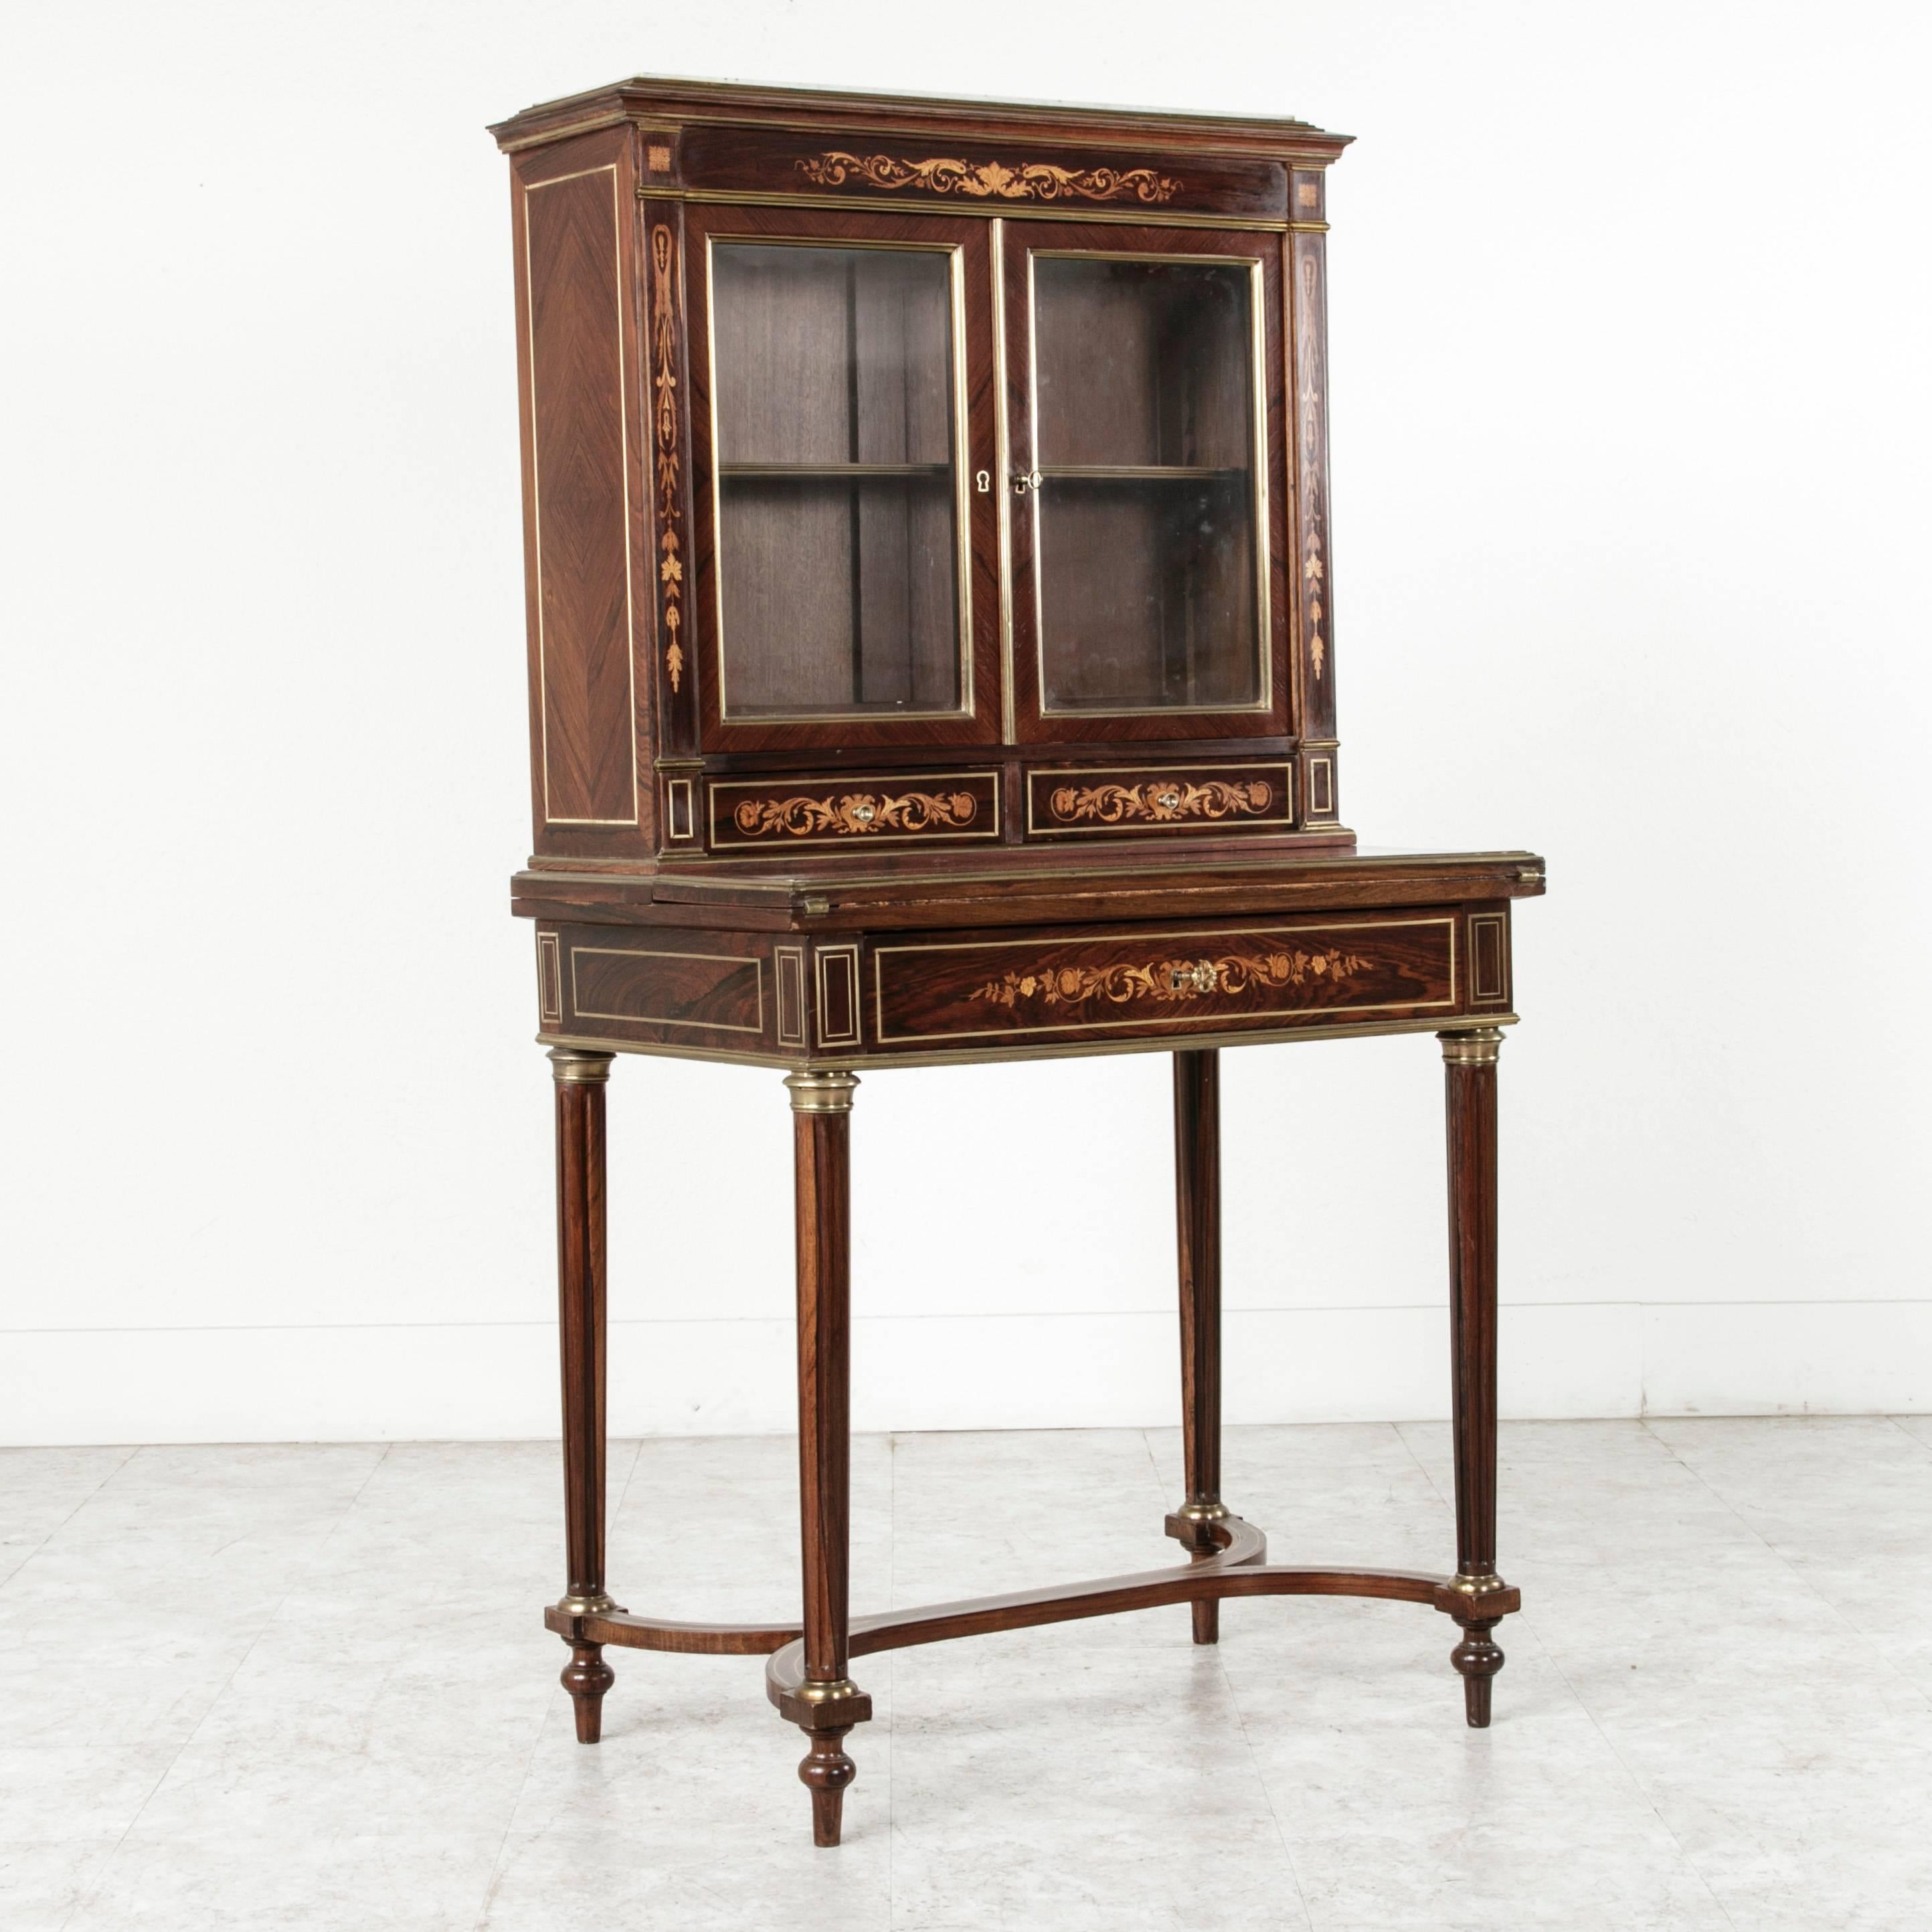 This exquisite French Bonheur Du Jour, or ‘daytime delight’ is impeccably inlaid with mahogany, rosewood, and lemonwood. Finished precisely with bronze mounts and banding, this piece is a writing desk and vitrine. The fold out writing surface, which